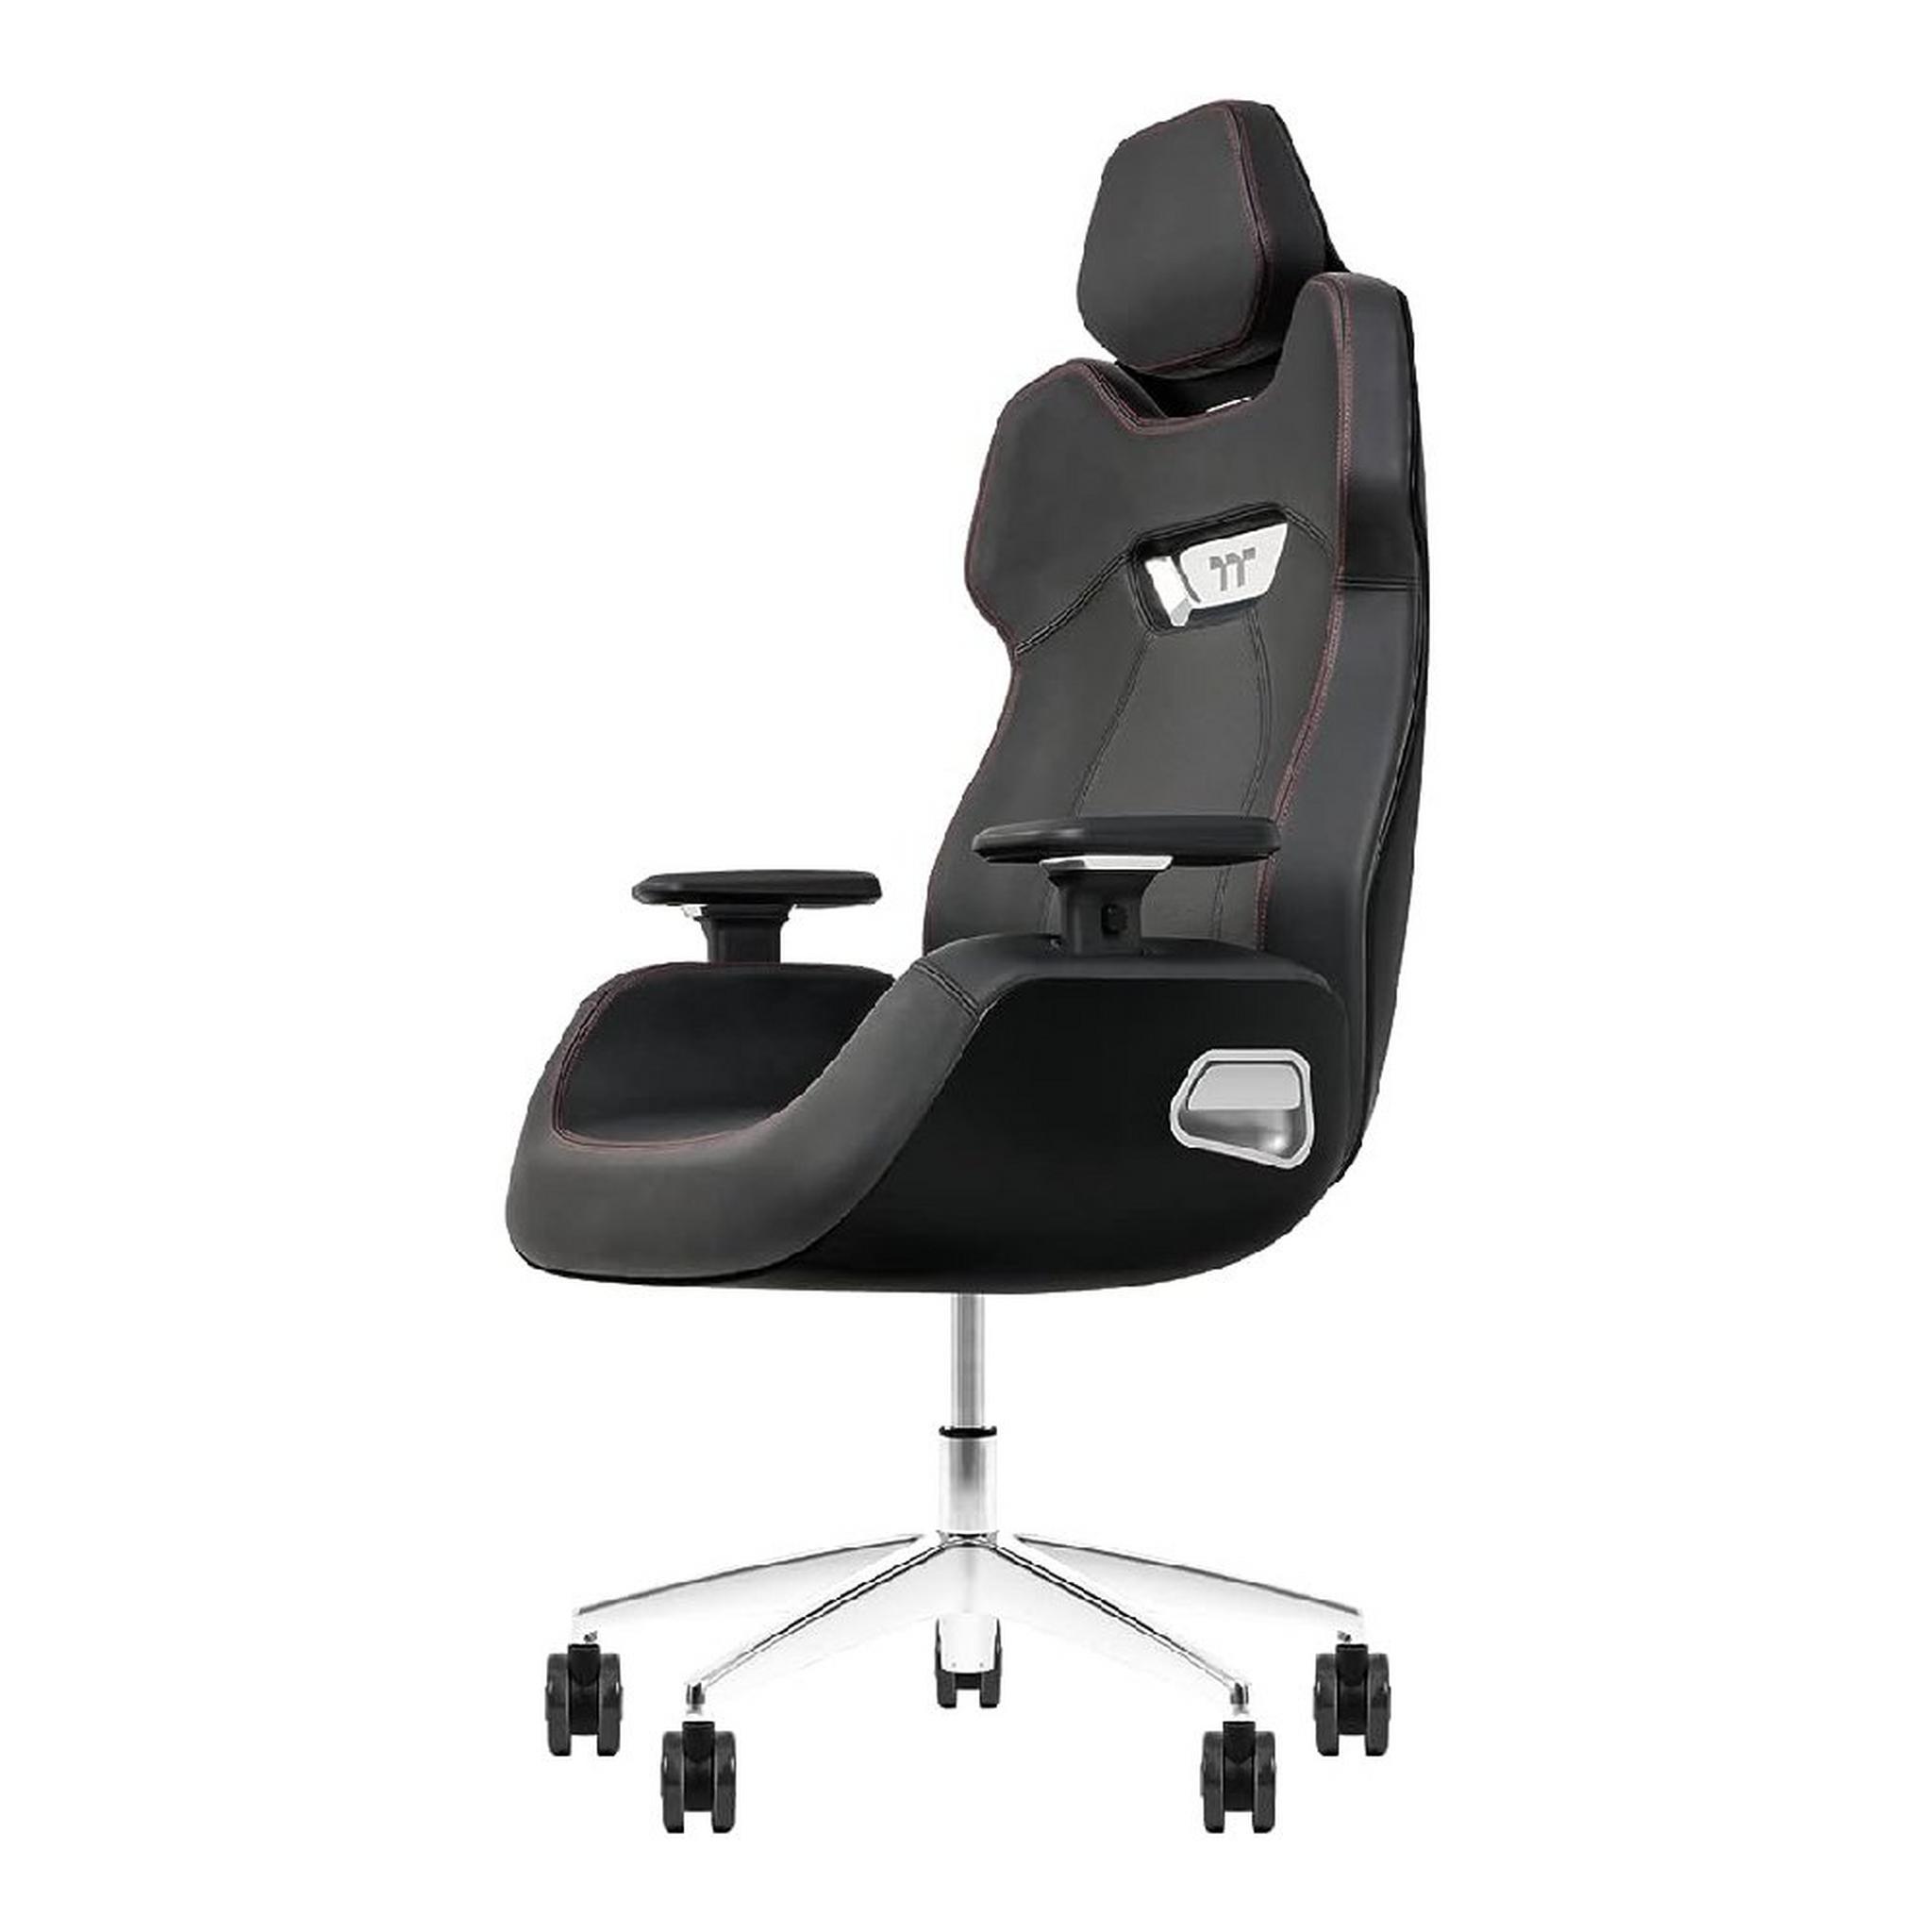 Thermaltake Argent E700 Real Leather Gaming Chair, Design by Studio F. A. Porsche, GGC-ARG-BBLFDL-01 – Black